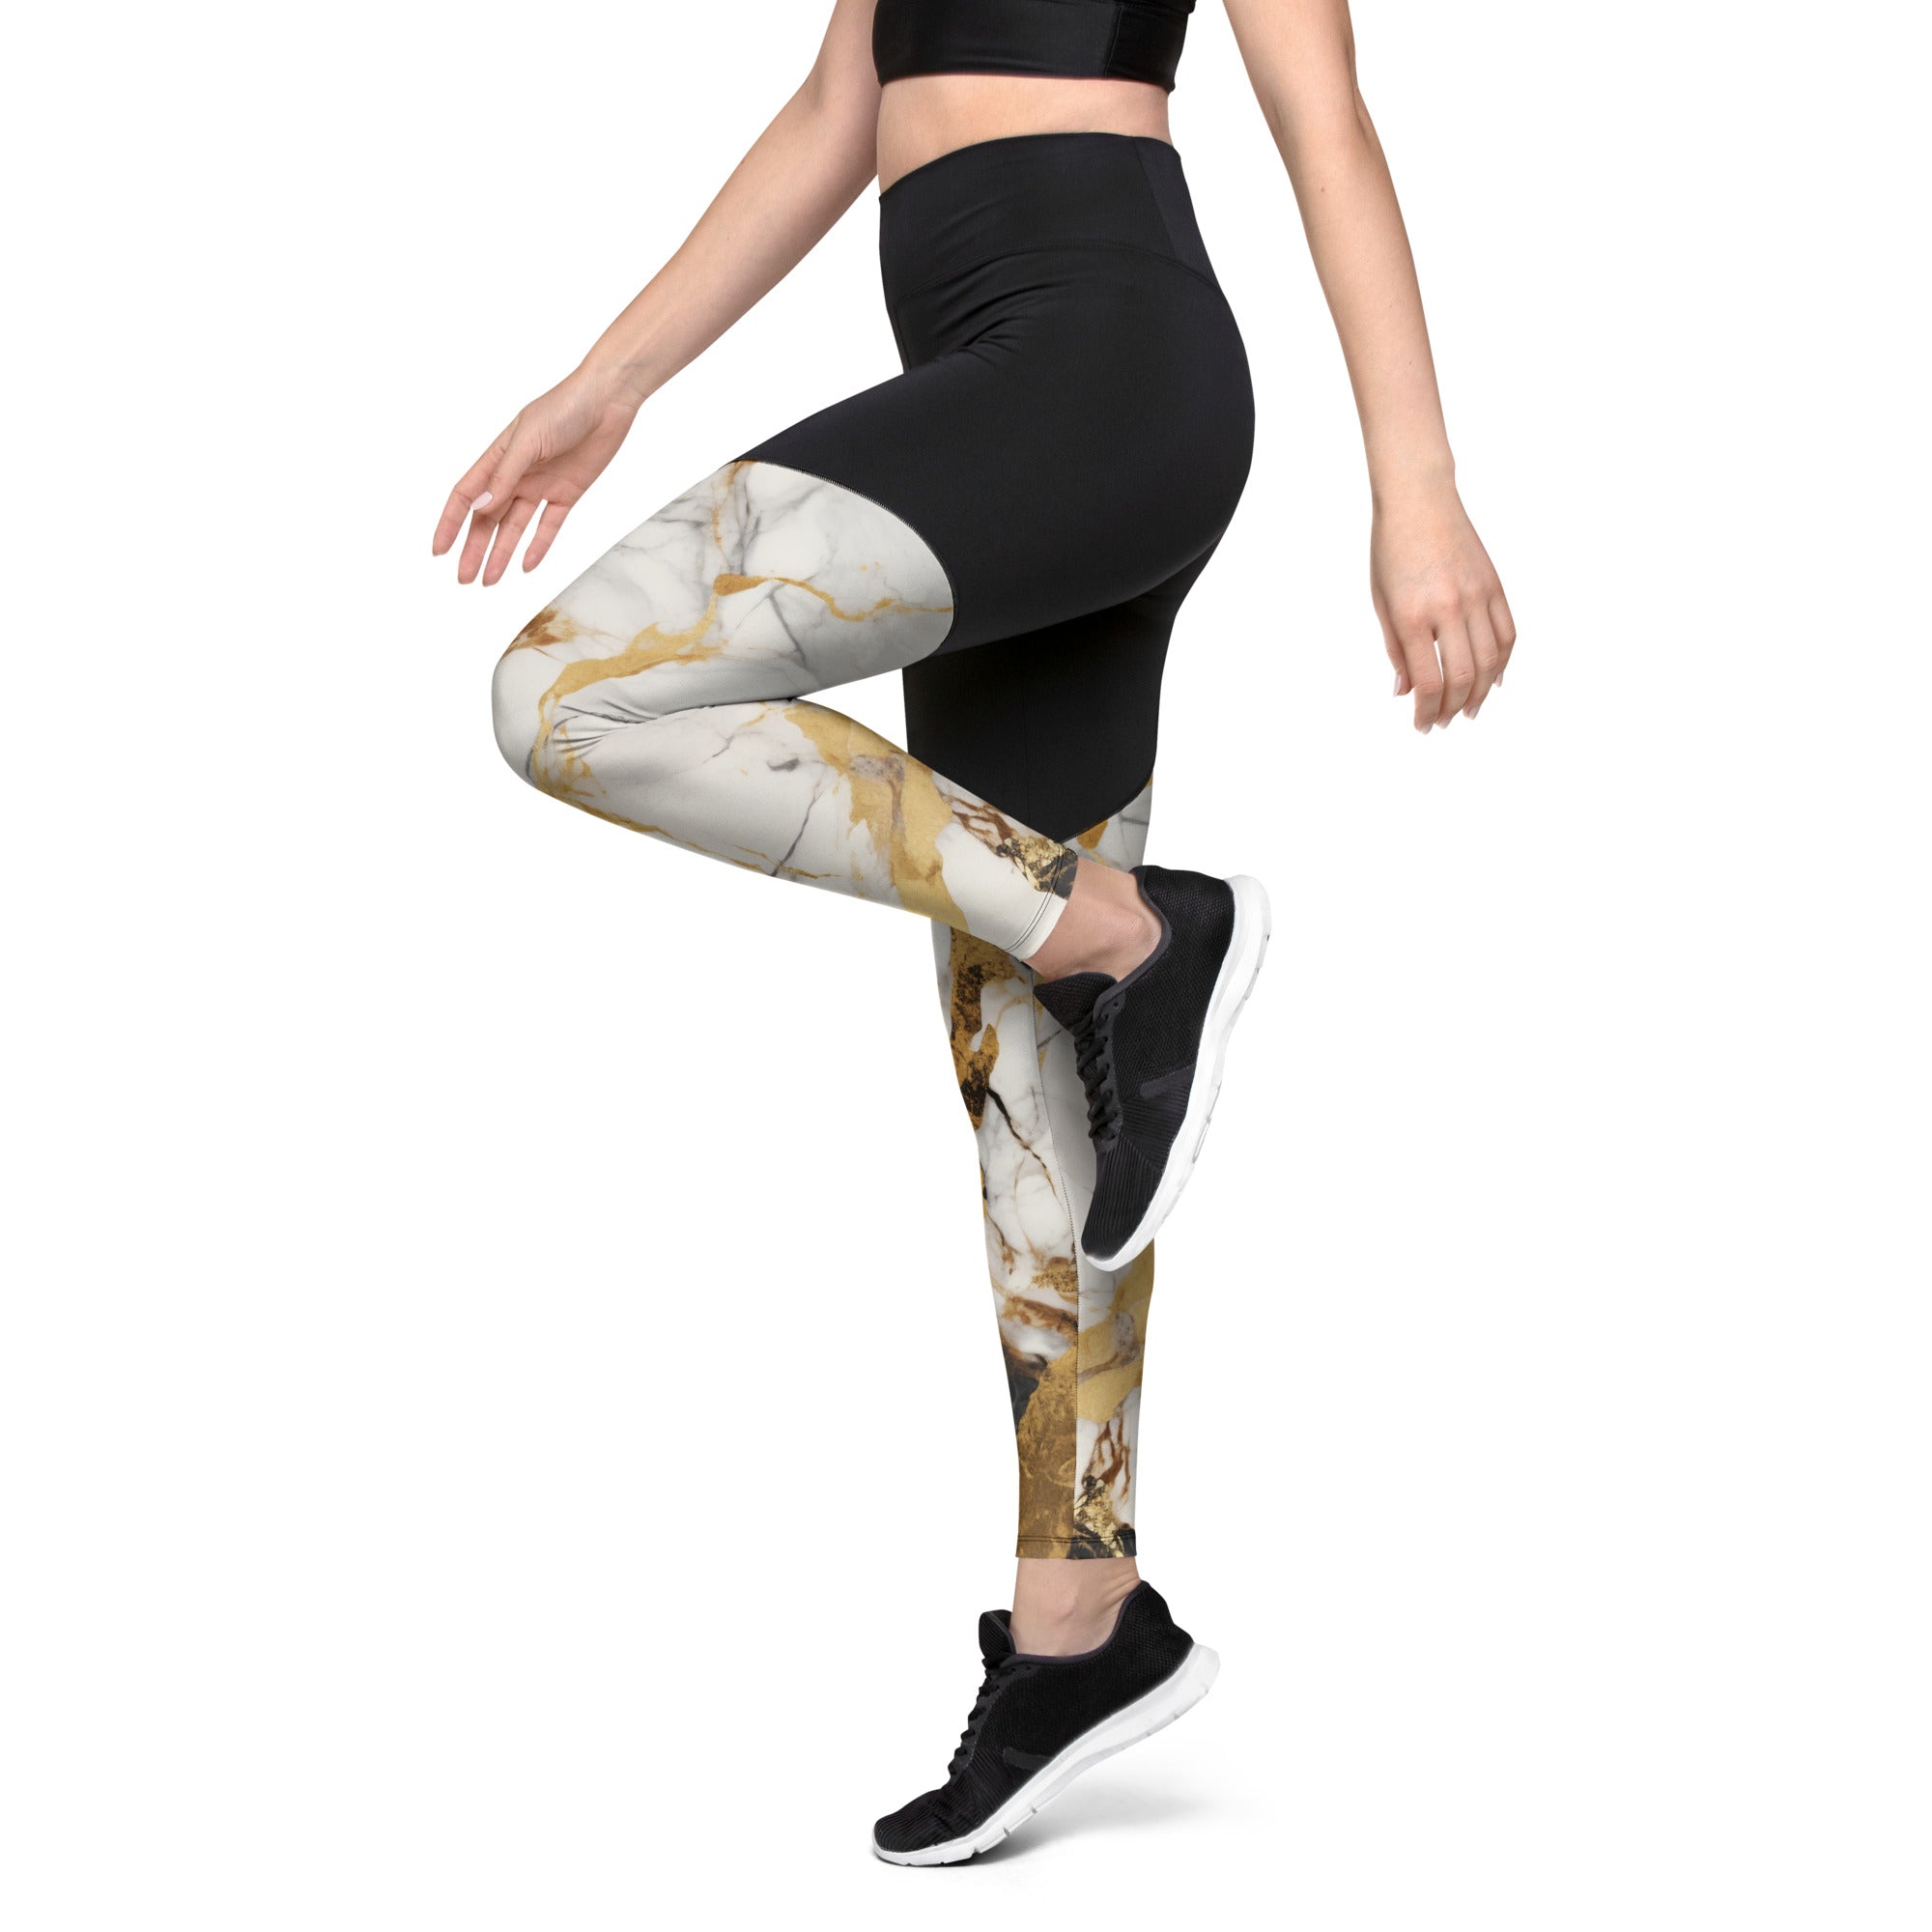 White & Gold Marble Compression Leggings